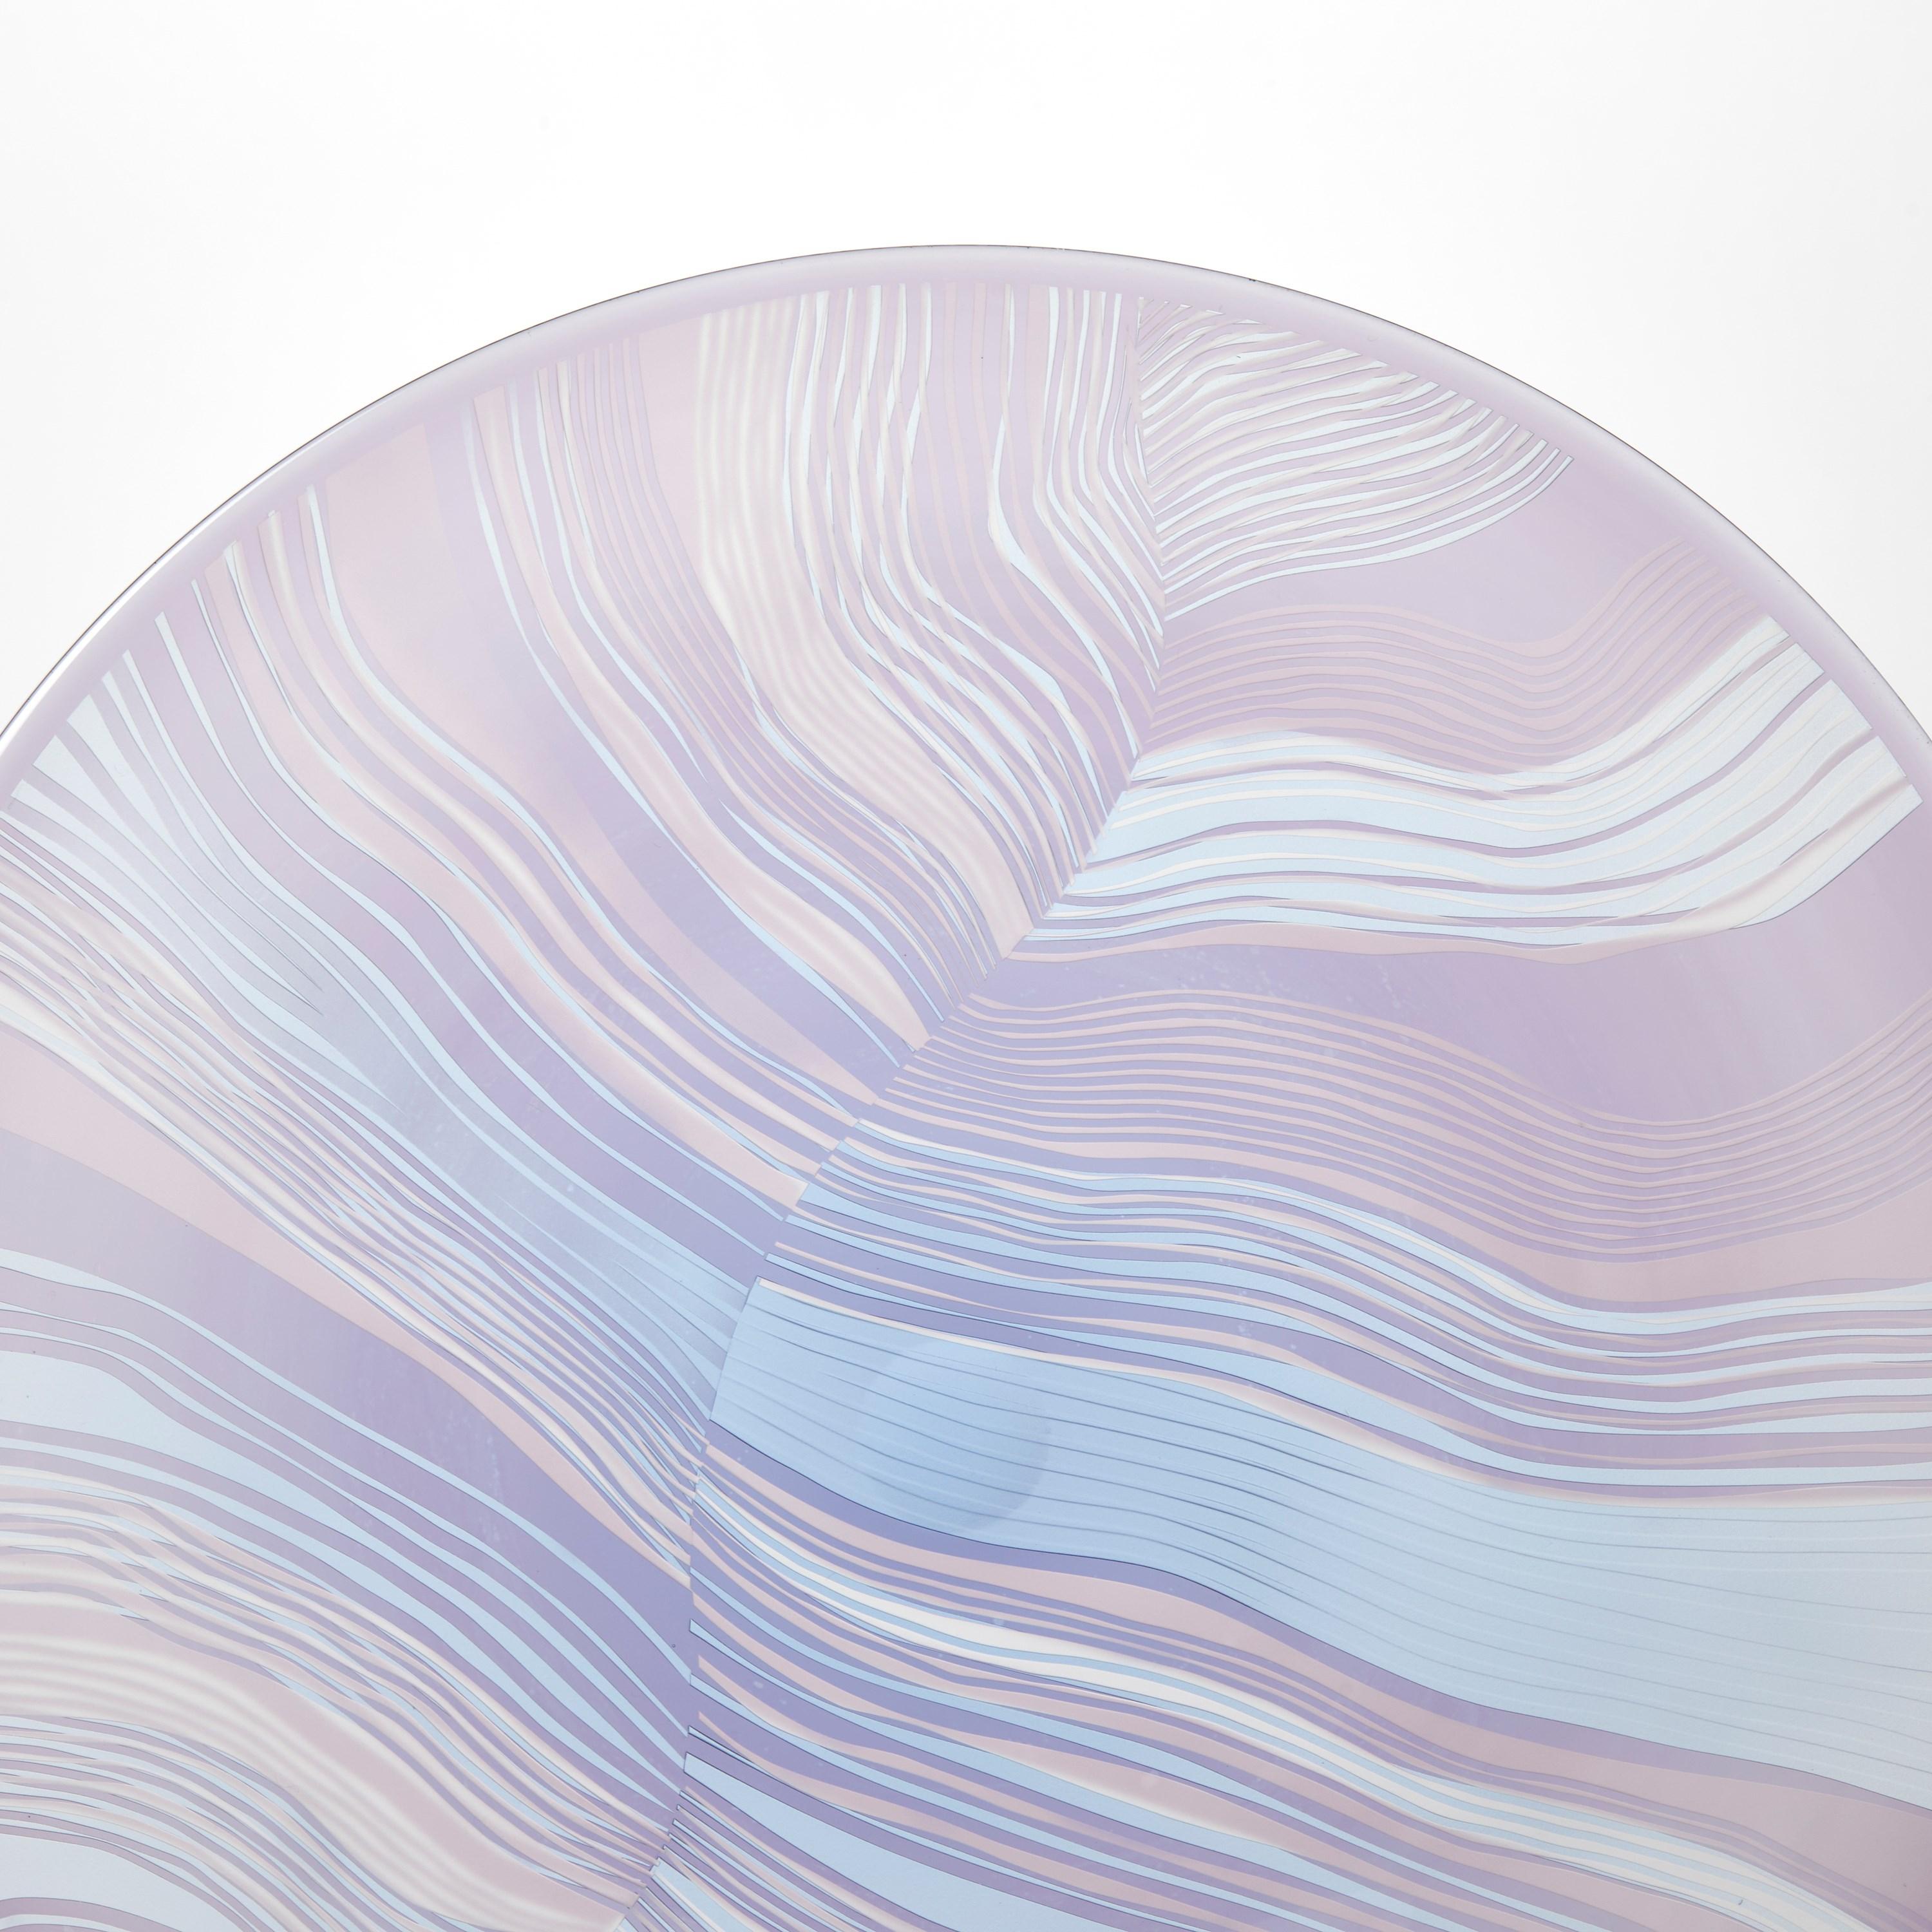 Hand-Crafted Solar Storm Sky Blue over Lilac, mounted linear cut glass artwork by Kate Jones For Sale